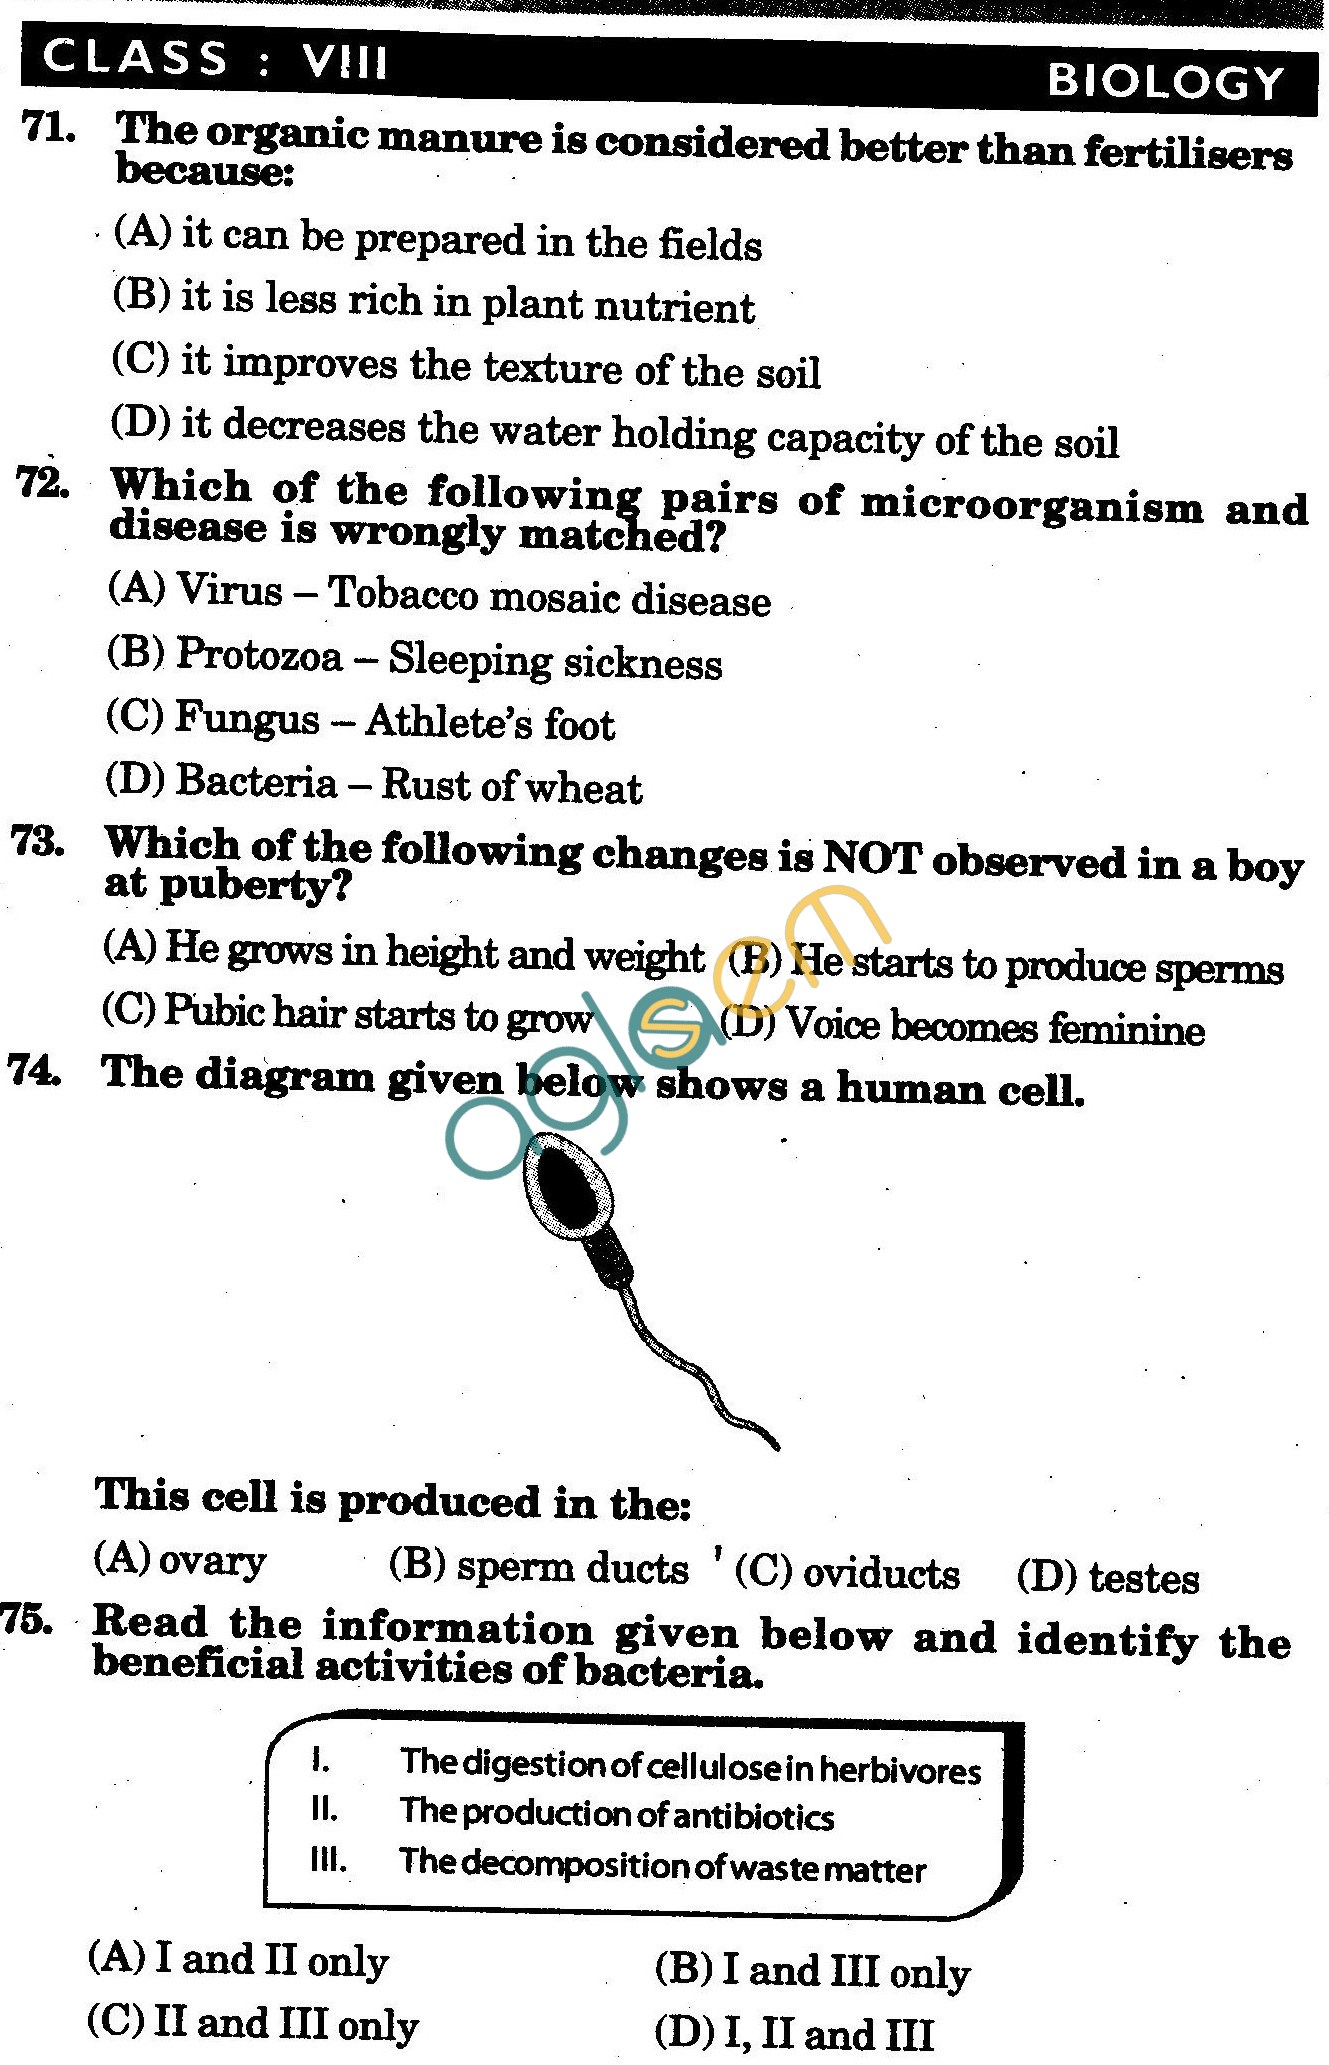 NSTSE 2010: Class VIII Question Paper with Answers - Biology